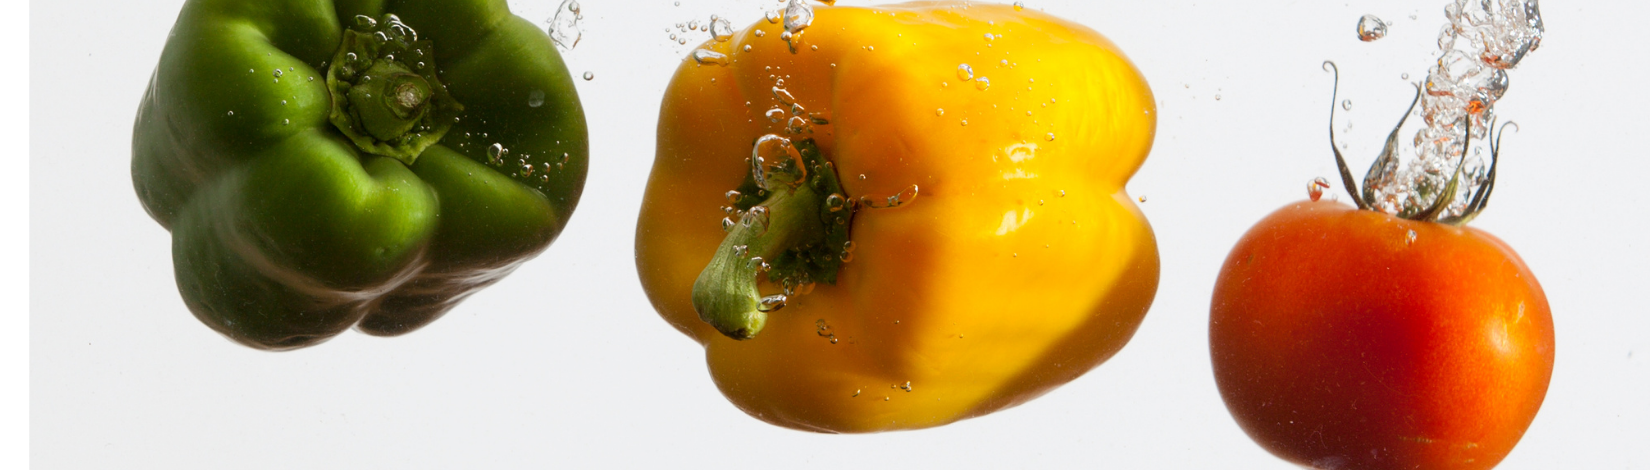 Bell peppers 1620x470